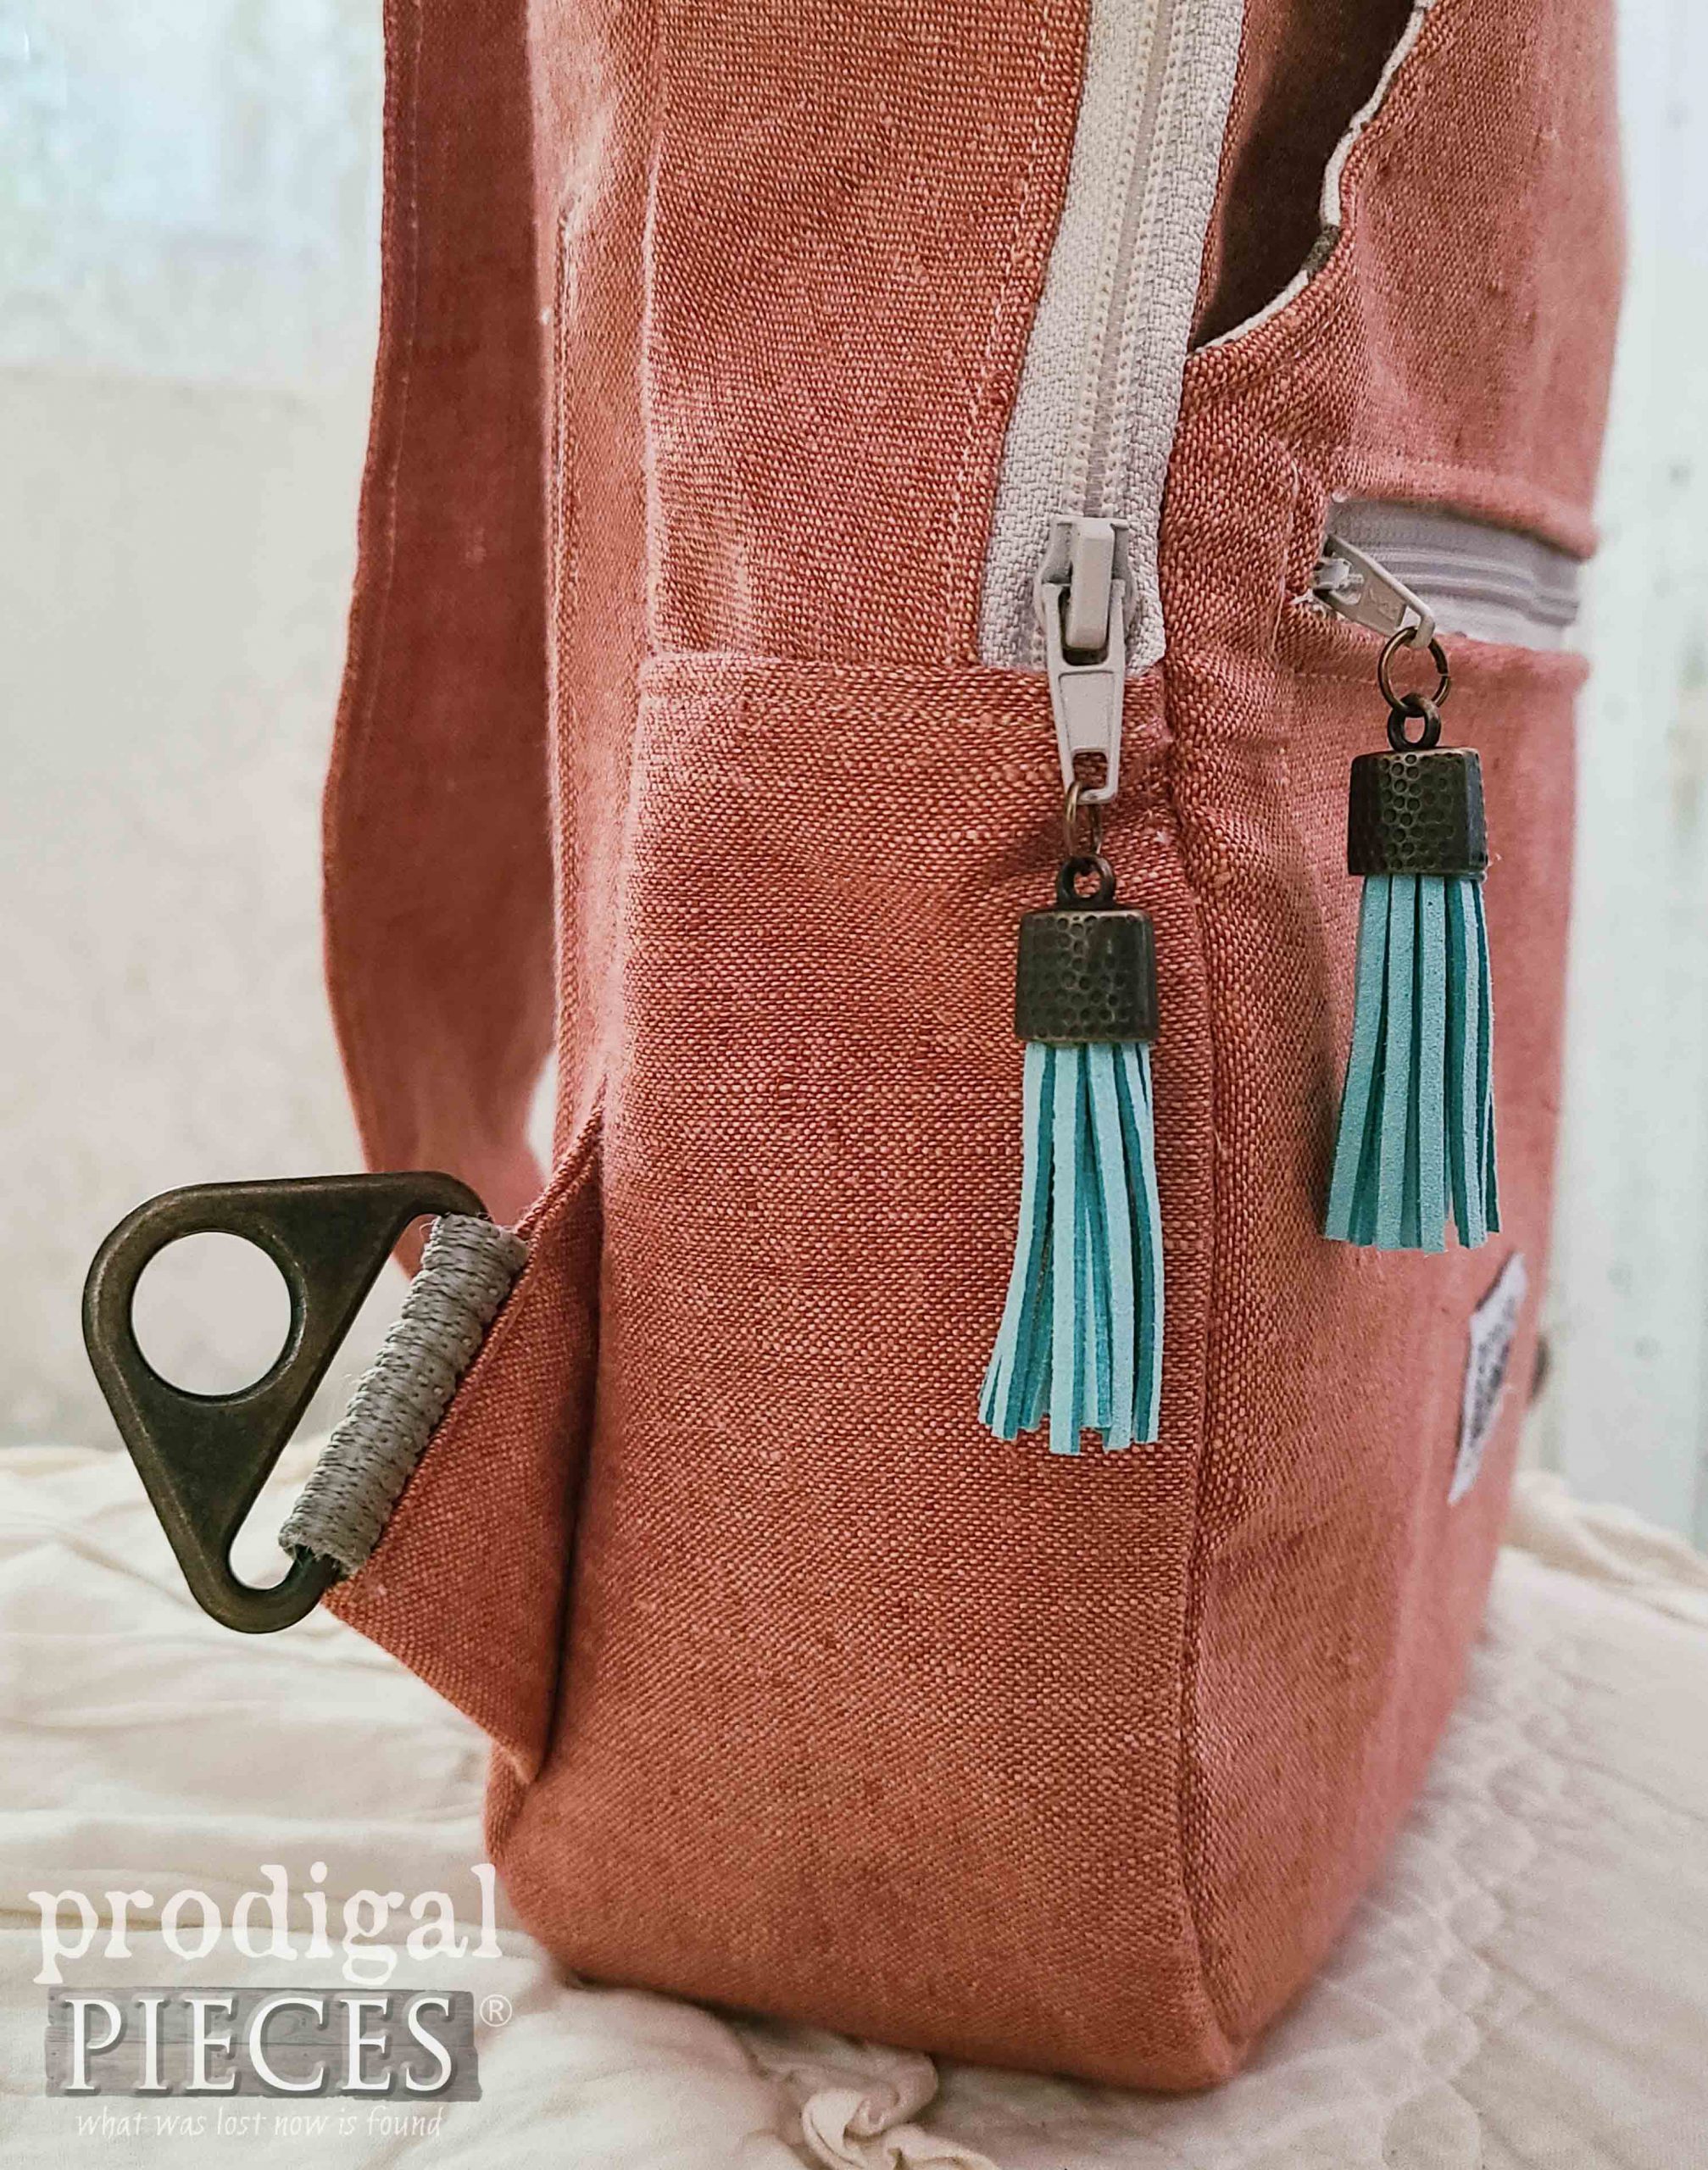 DIY Crossbody Bag Features by Prodigal Pieces | prodigalpieces.com #prodigalpieces #sewing #upcycled #refashioned